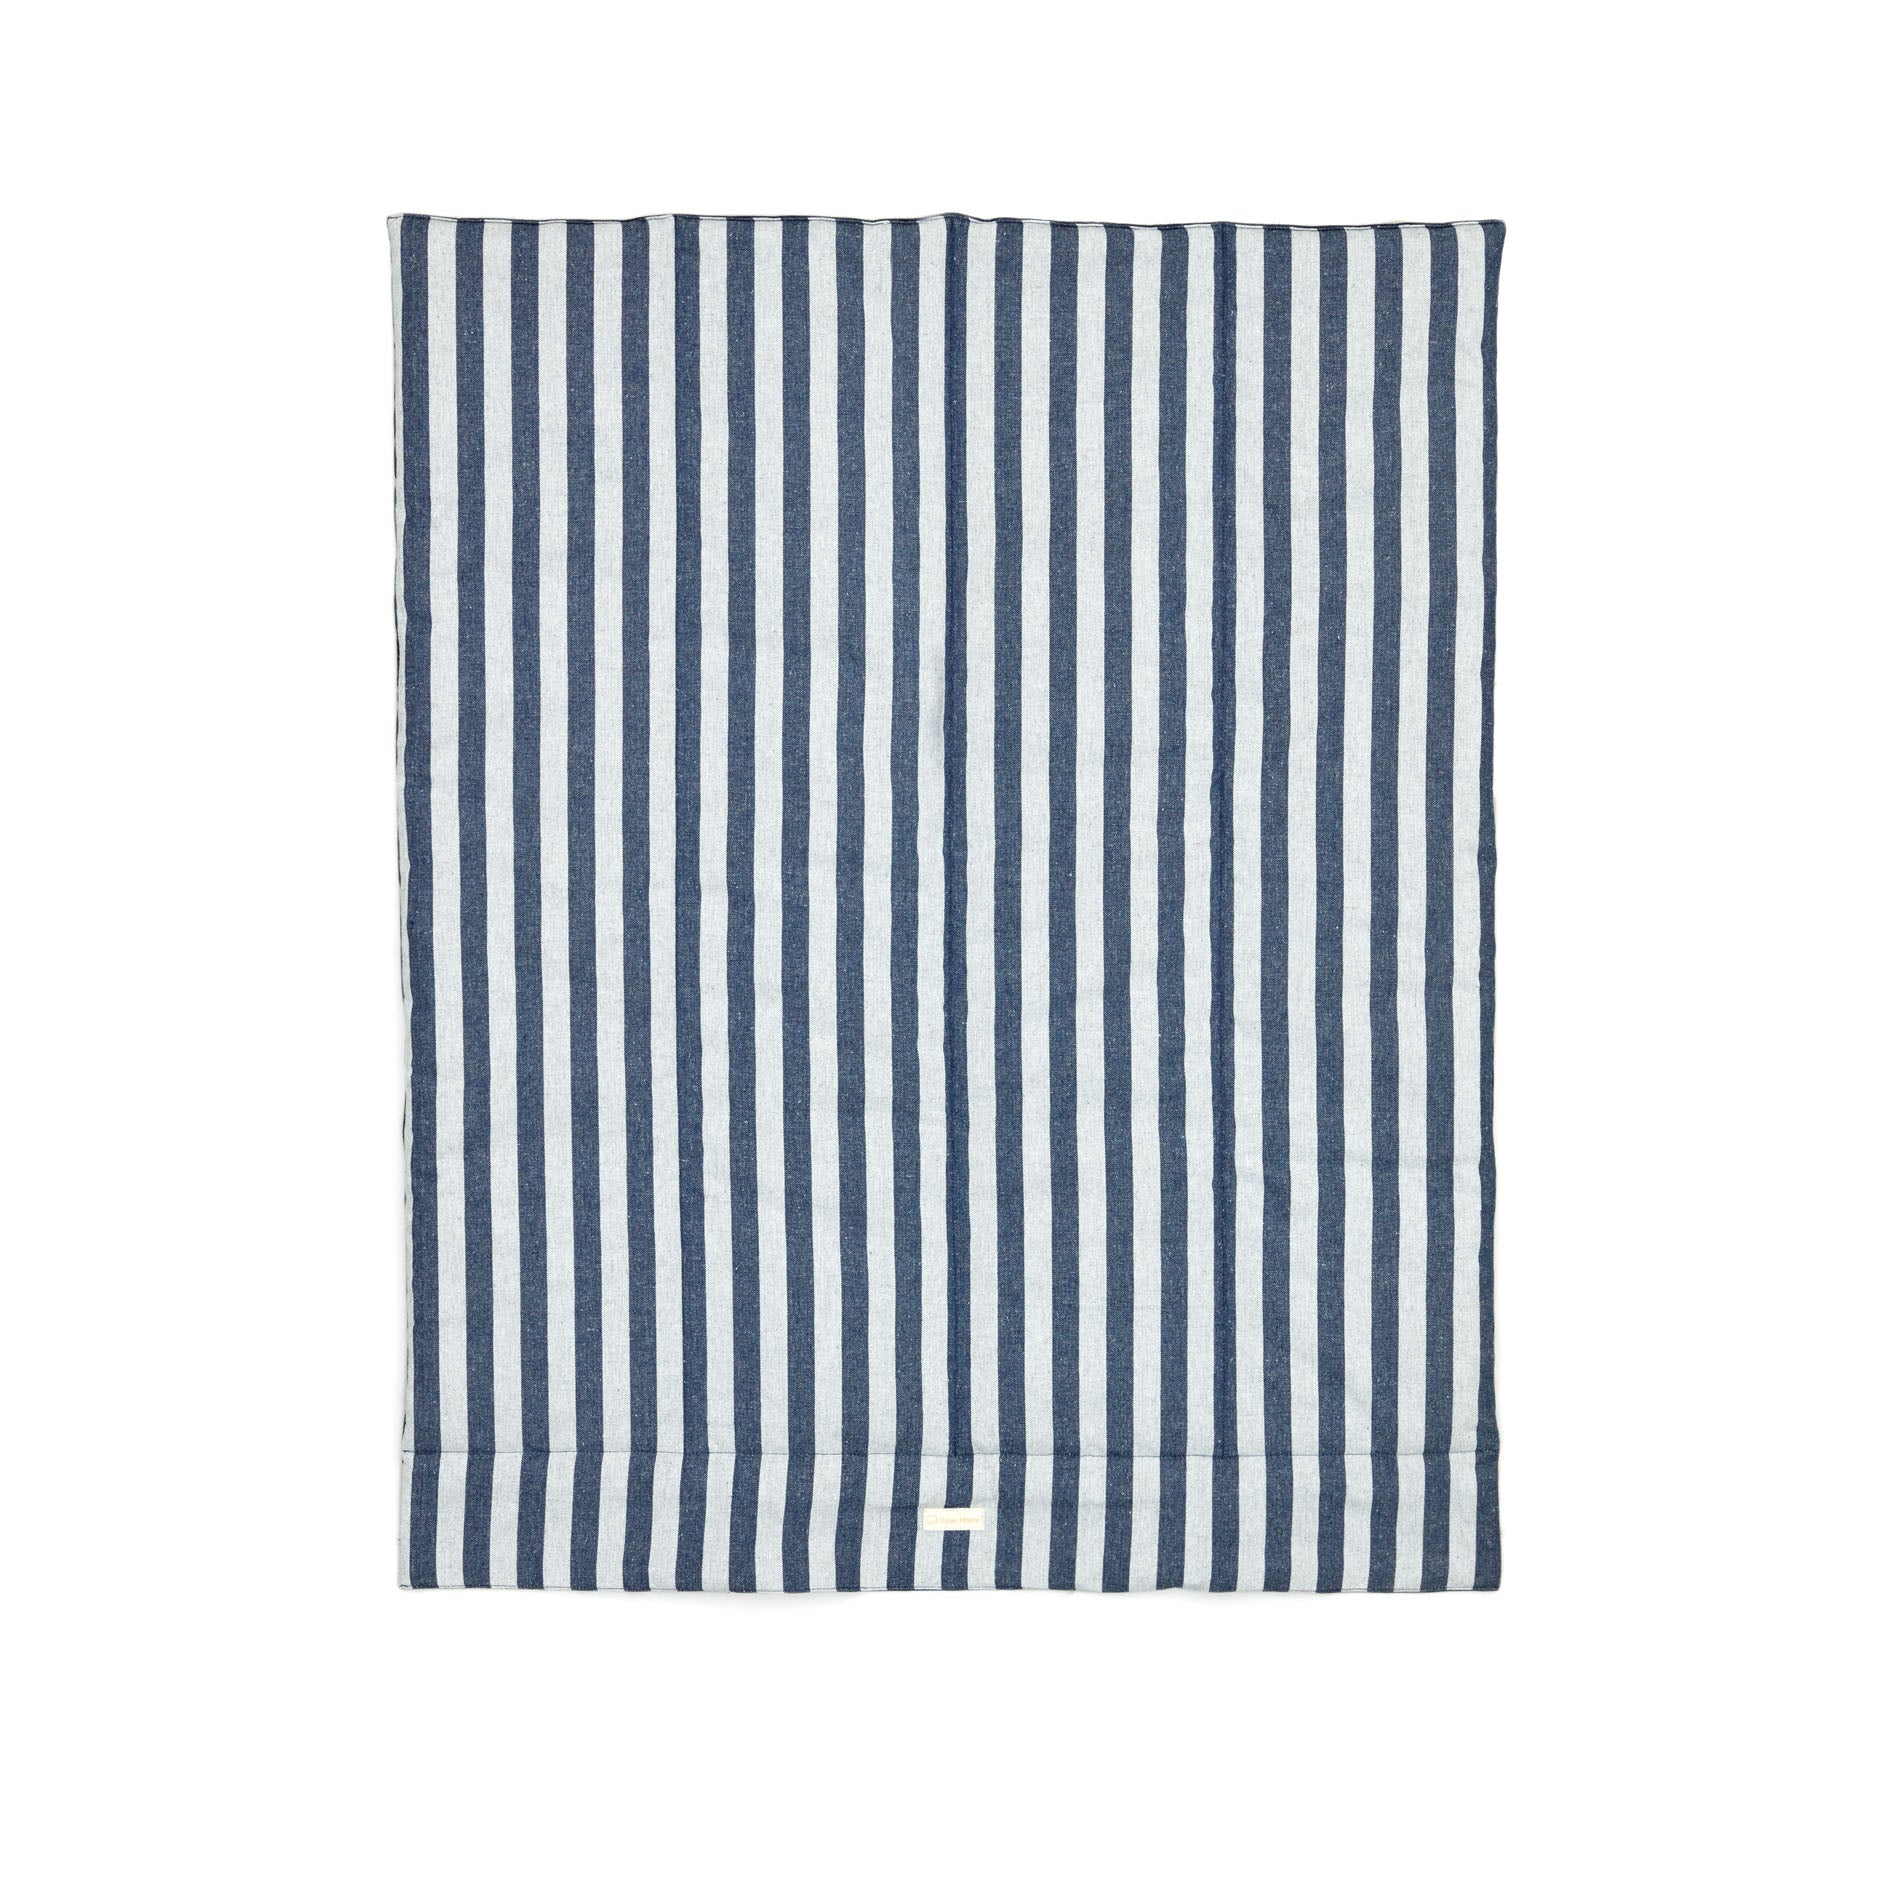 Tabby 100% cotton portable pet blanket with blue and grey stripes, 80 x 100 cm